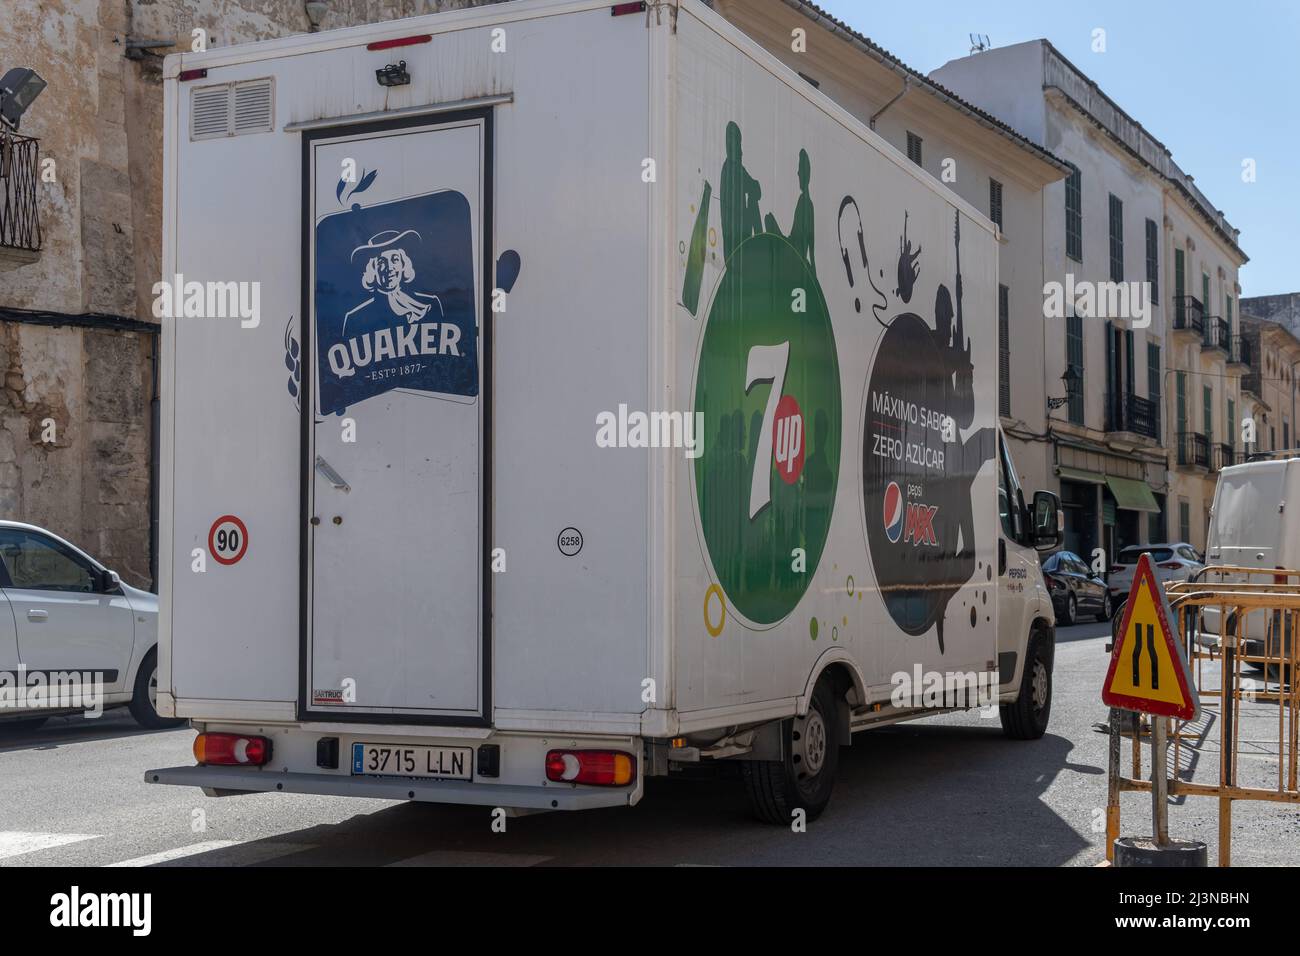 Felanitx, Spain; april 07 2022: Delivery van of the company Pepsi, parked in a central street of the Mallorcan town of Felanitx, Spain Stock Photo